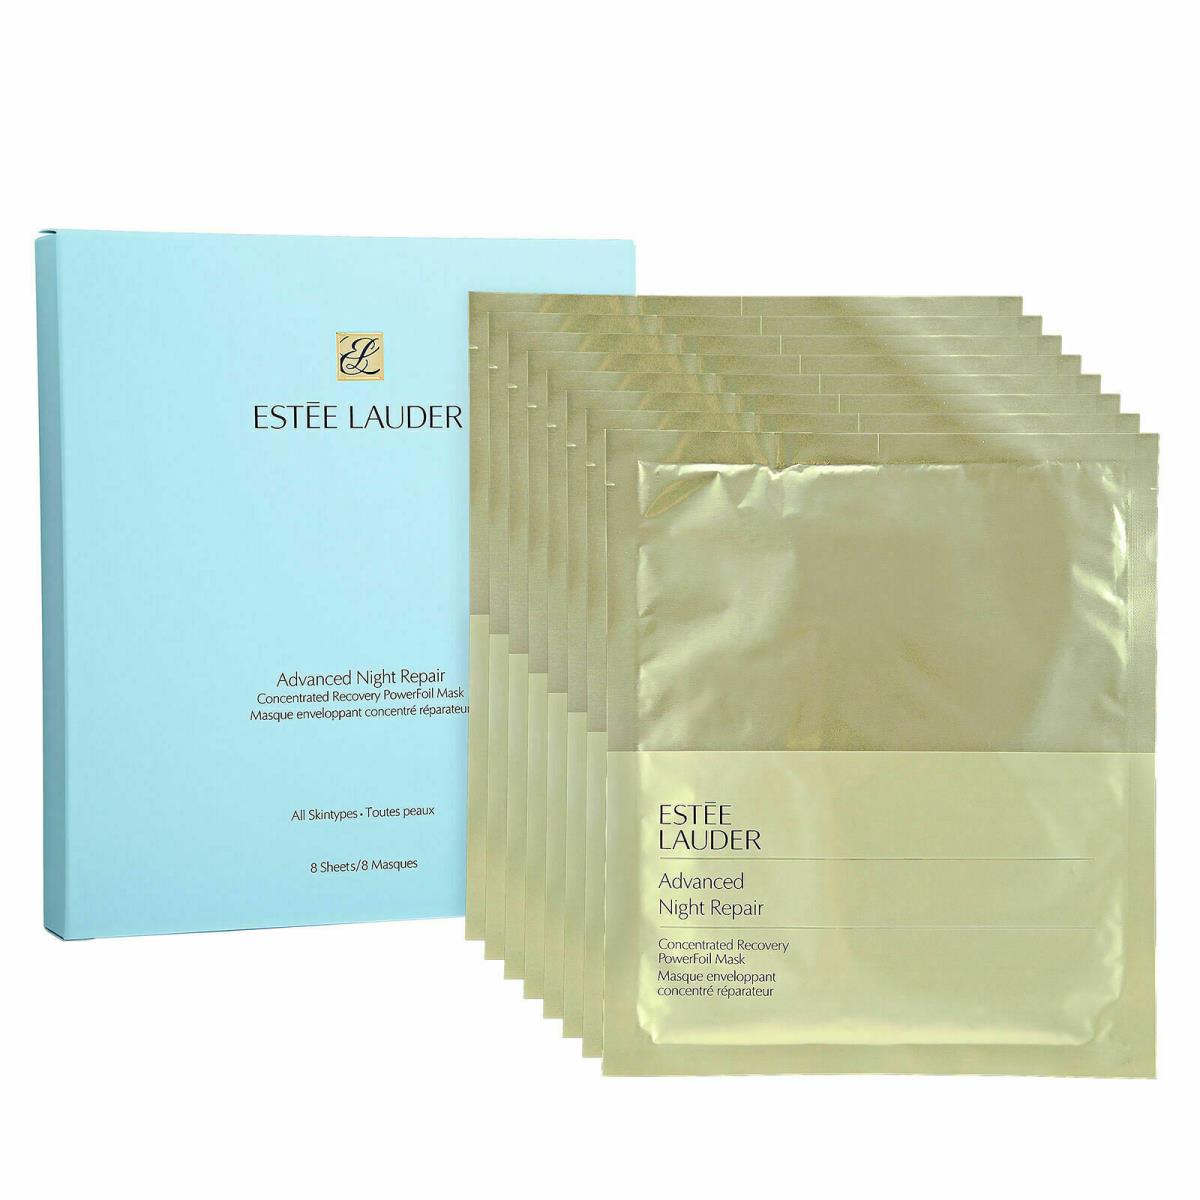 Estee Lauder Advanced Night Repair Concentrated Recovery Powerfoil Mask 8 Sheets